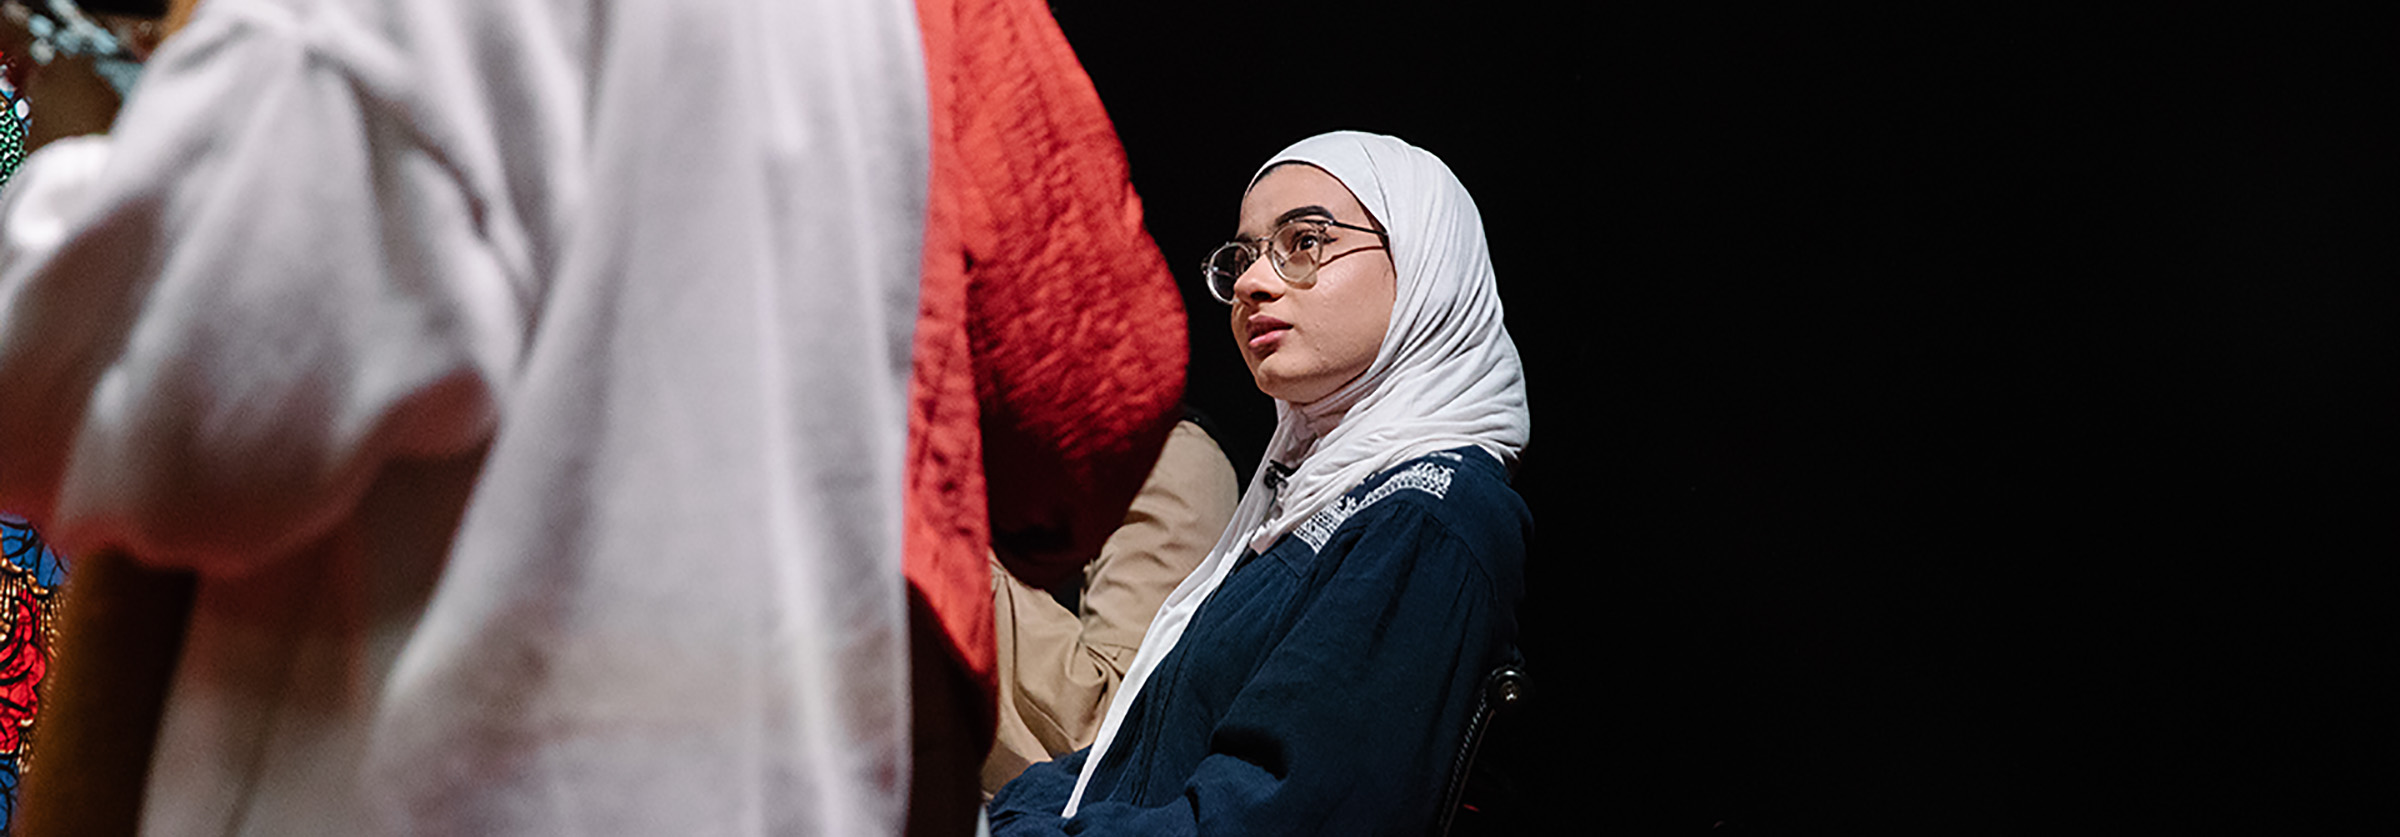 Woman in hijab with glasses listening in crowd in dark room